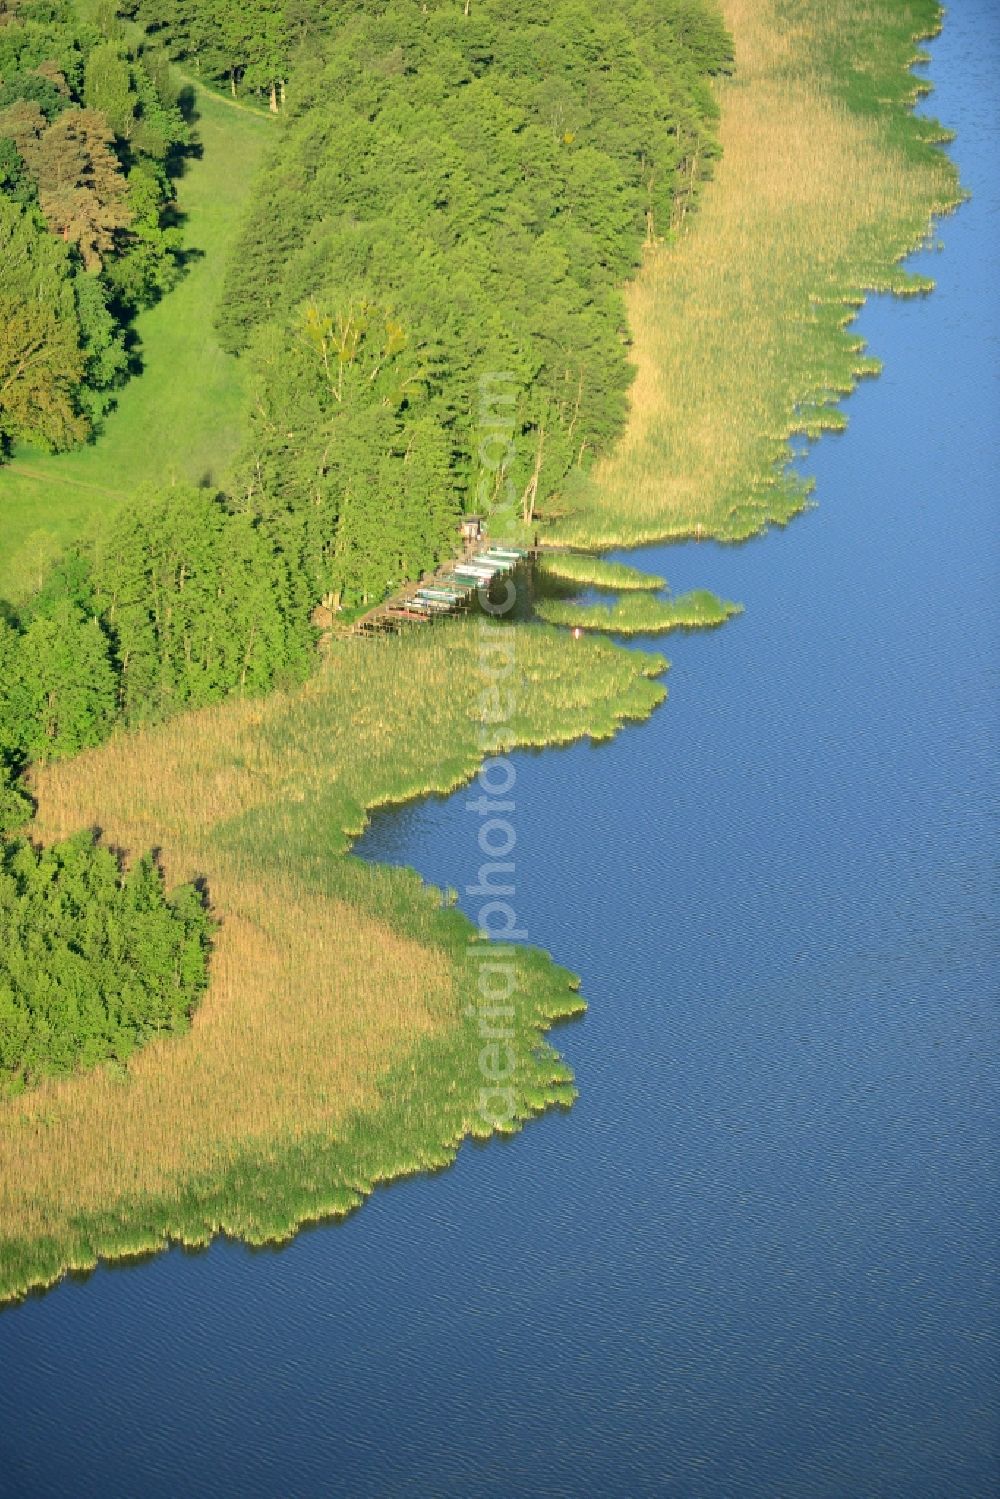 Aerial photograph Löwenberger Land - Shores of Dreetzsee lake in the borough of Loewenberger Land in the state of Brandenburg. The lake is surrounded by trees and forest, the next village is the Grueneberg part of the borough. A small boat dock is located on its shore